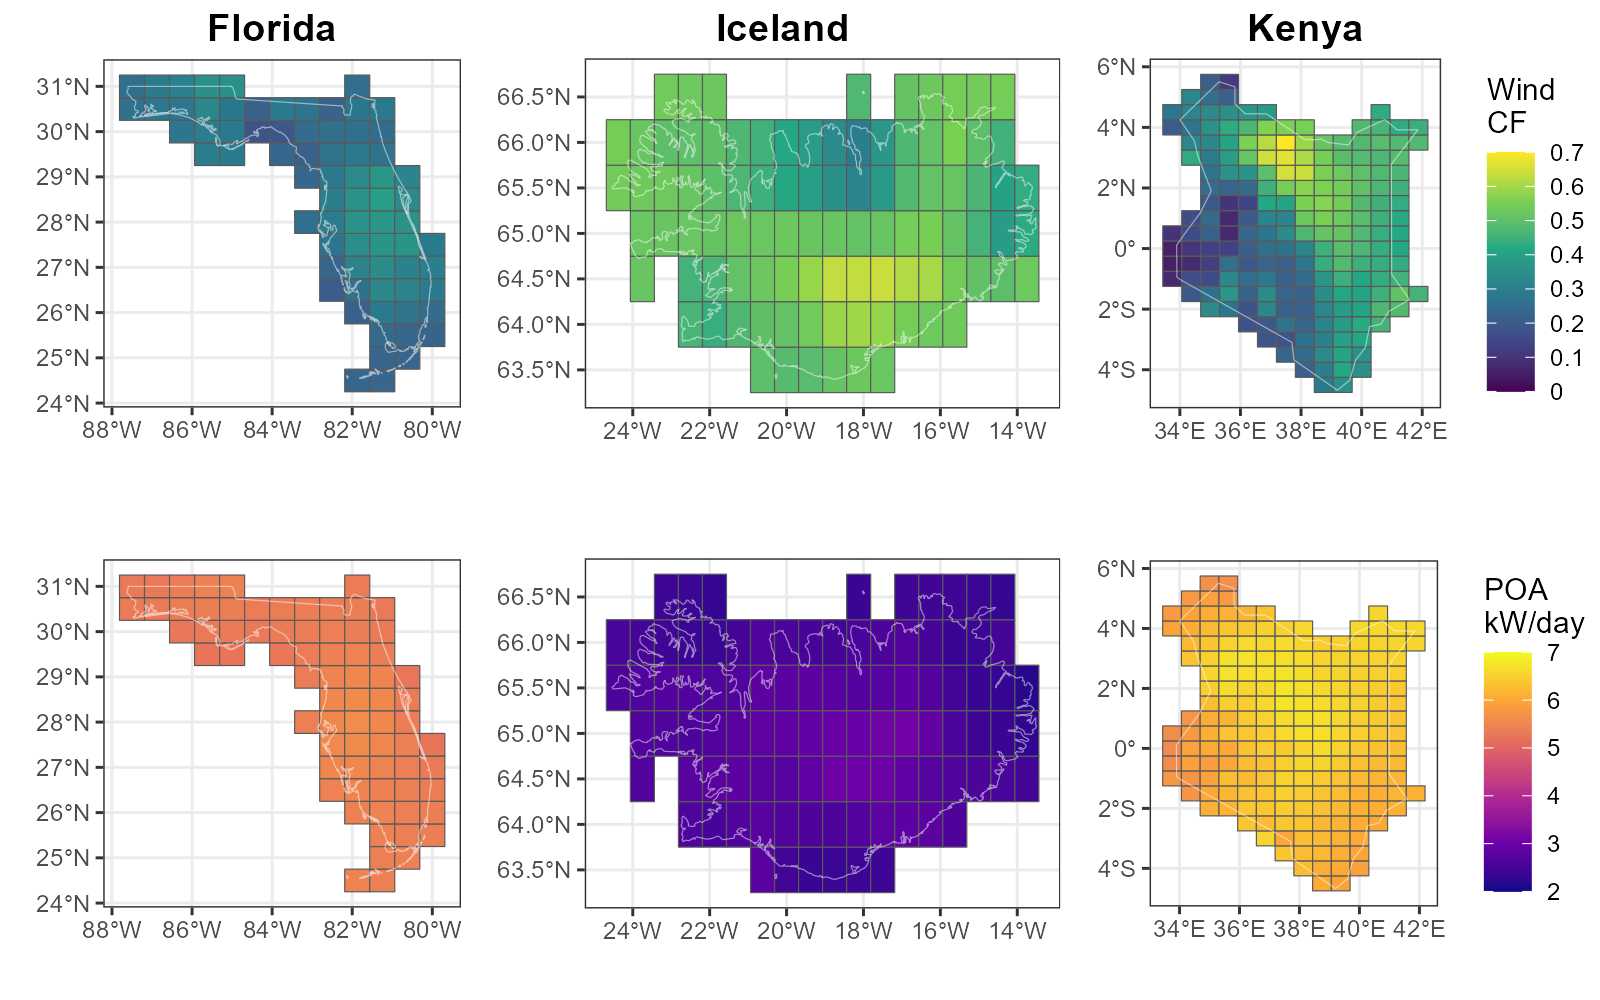 Wind power capacity factors (CF) and Solar irradiance on Plane of Array (POA) by regions